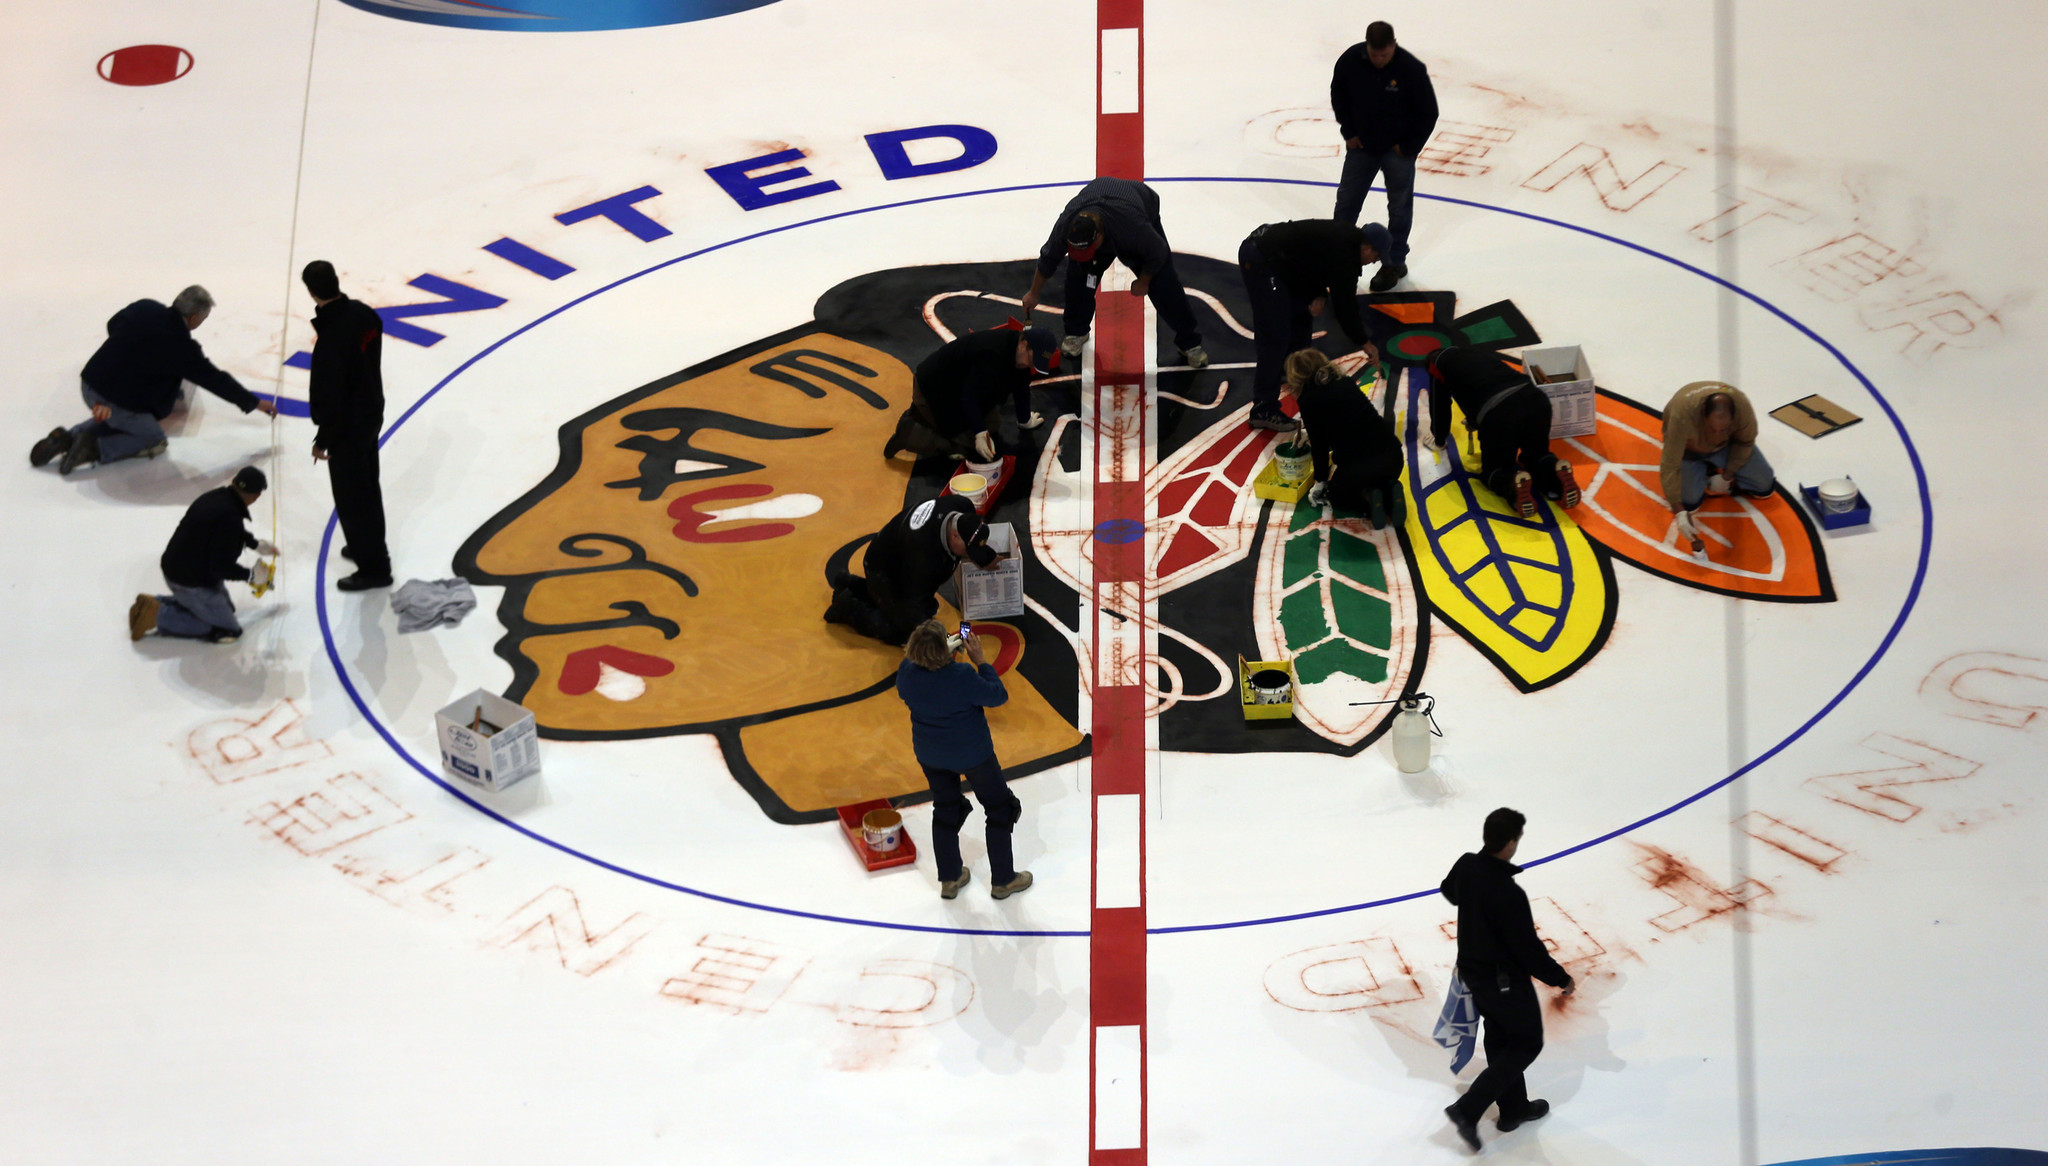 Chicago Blackhawks to keep name, vow change through dialogue: 'There is a  fine line between respect and disrespect